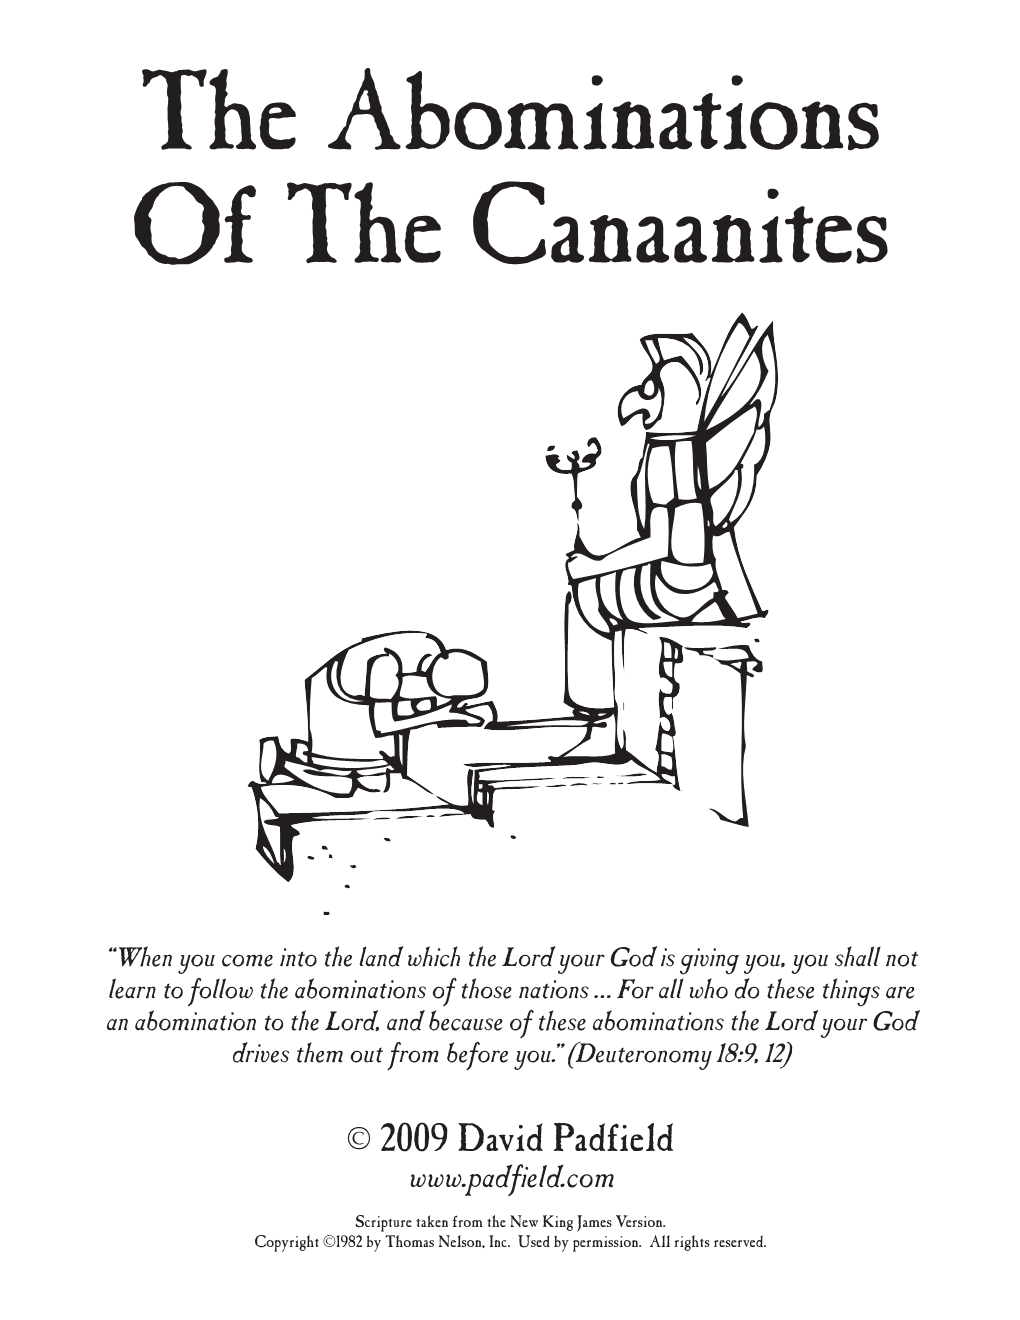 The Abominations of the Canaanites